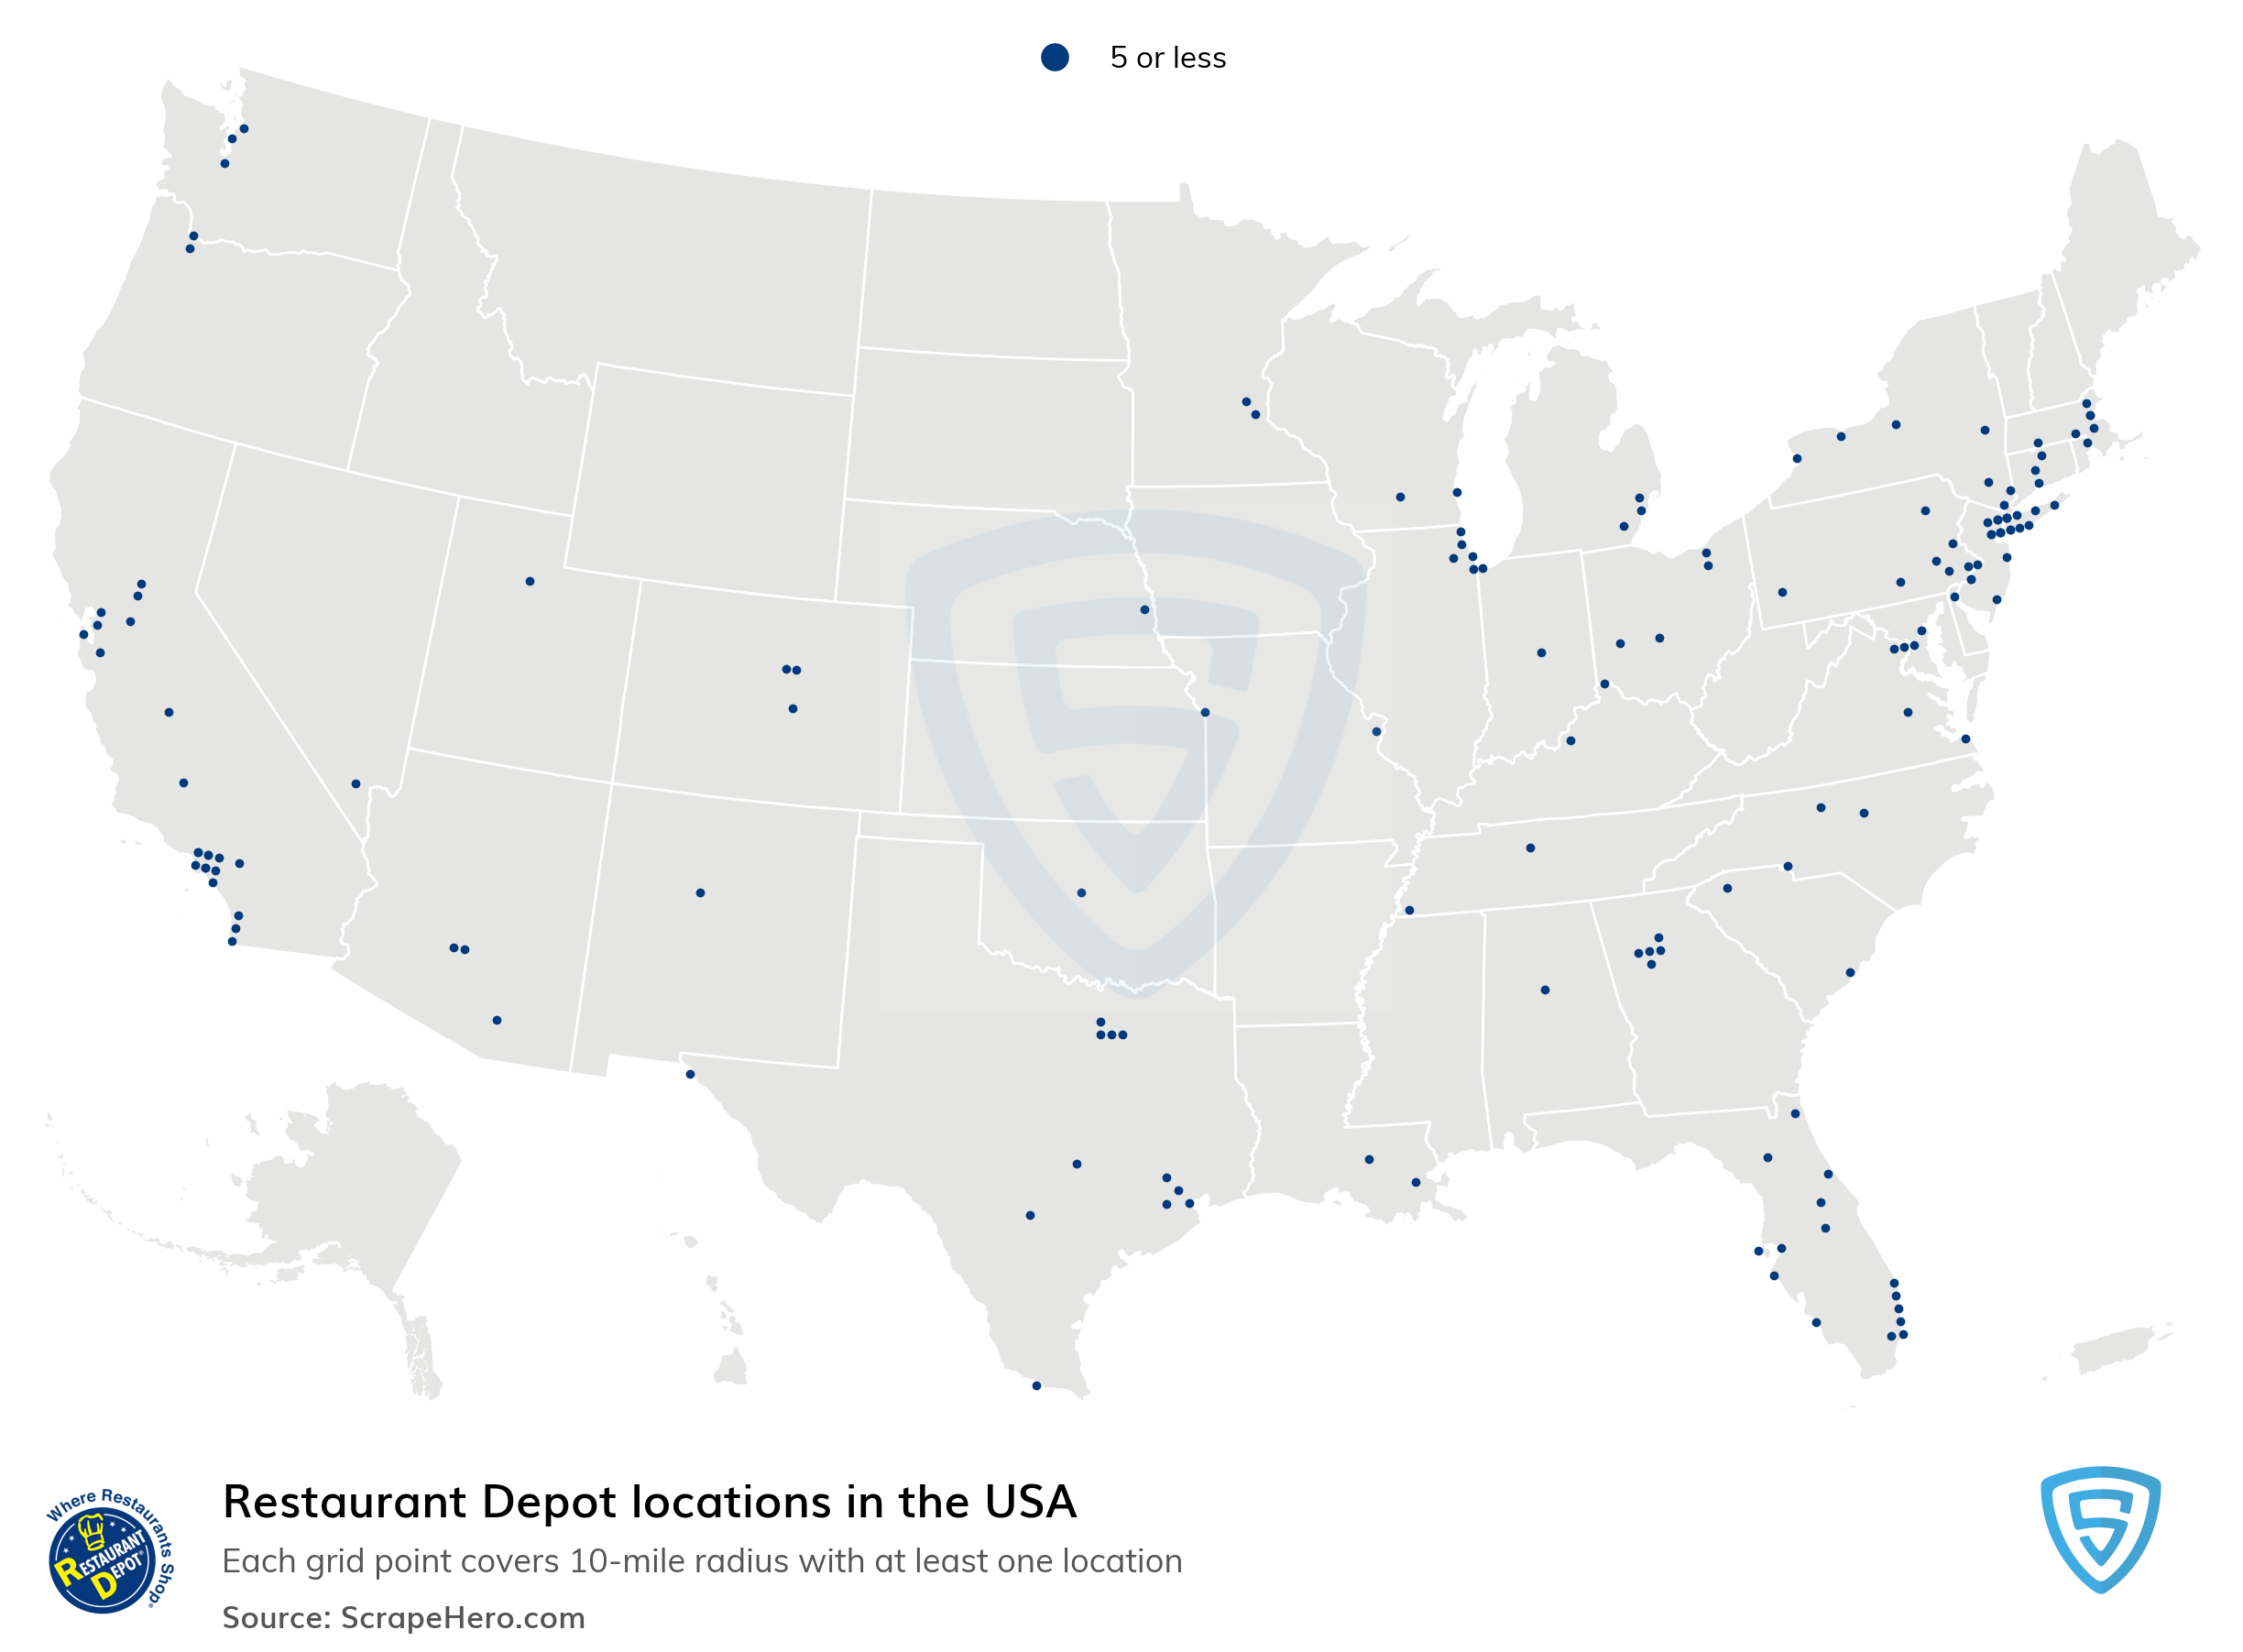 Restaurant Depot locations in the USA